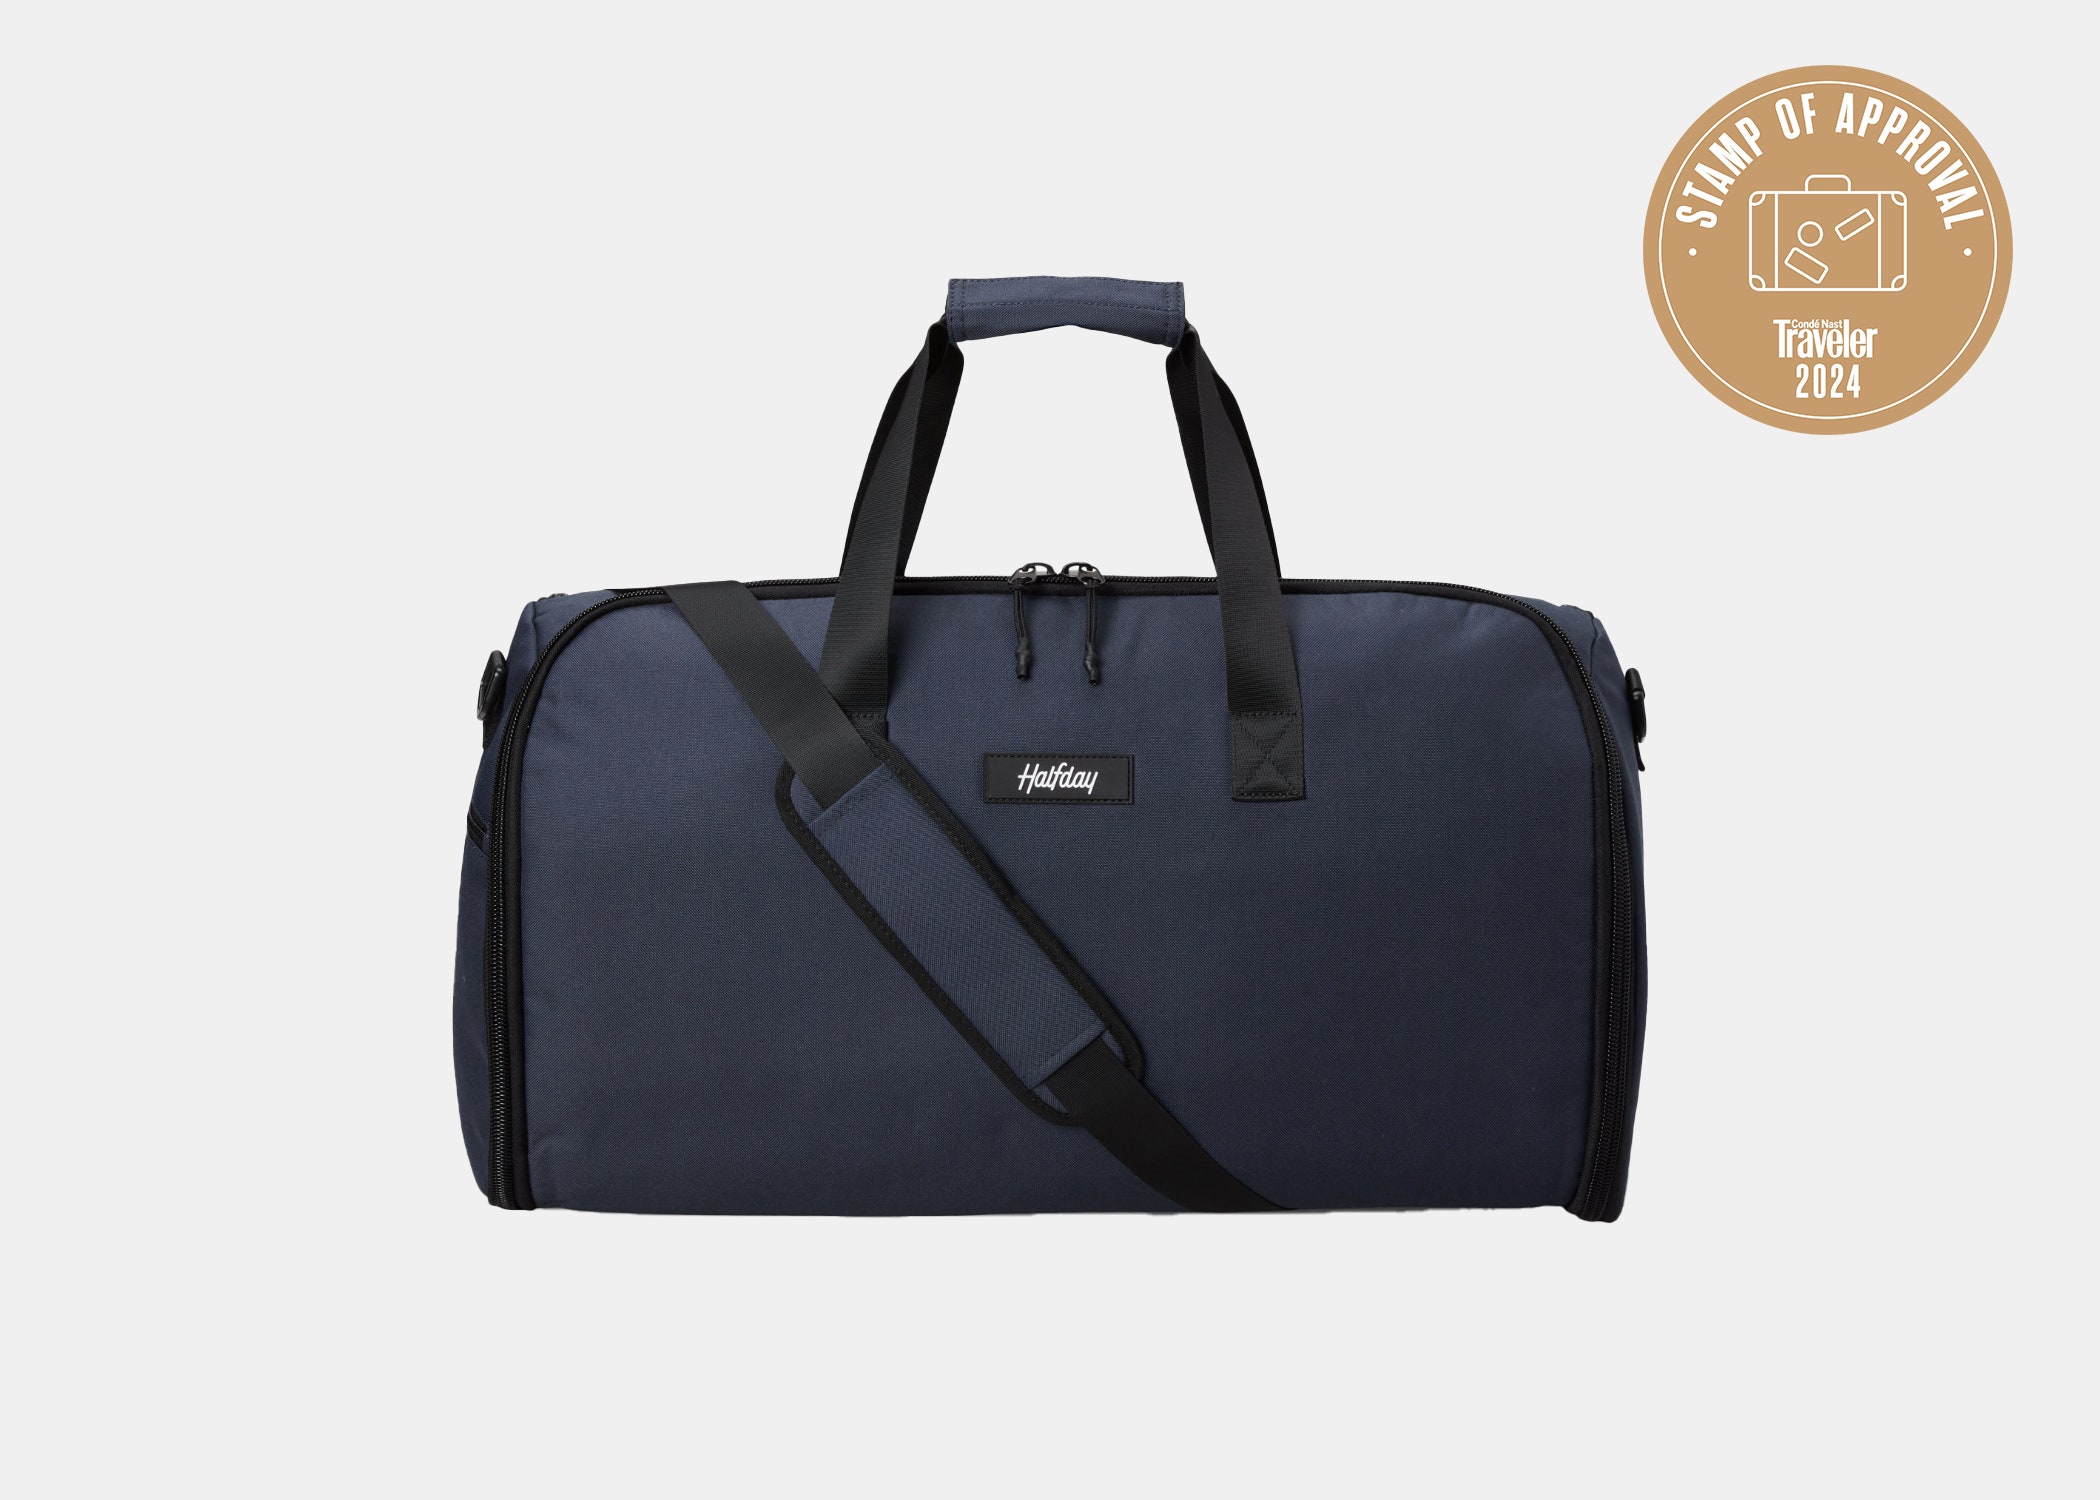 <p><strong>Best weekender bag</strong></p> <p>In theory, I love the idea of being someone who packs light, of exuding a vibe of low-maintenance ease. Plus, there's so much cool gear out there that speaks to that energy, like this hybrid garment-bag-duffel-bag by Halfday. It's a garment bag that removes the stress of folding clothes like suits and dresses, but offers the added functionality of transforming into a <a href="https://www.cntraveler.com/gallery/best-weekender-bags?mbid=synd_msn_rss&utm_source=msn&utm_medium=syndication">weekender</a> and carrying all your other must-haves like a <a href="https://www.cntraveler.com/story/best-toiletry-bags-dopp-kits-for-women?mbid=synd_msn_rss&utm_source=msn&utm_medium=syndication">Dopp kit</a> with all your skincare and, I guess, underwear. So I took the Halfday for a test drive on a weekend in the Bahamas, and I can confidently say that, though your mileage may vary, it's perfect for short trips. I was able to pack two suits, some shirts, a pair of jeans, and some, but not all, of my essentials; I still had to bring a carry-on suitcase onto the plane. (I also brought three pairs of shoes. I am not, it should be said, someone who packs light.) So if you don't need six outfit options for a two-night trip, this is a perfect fit for you on its own. As for me, give me a shout when they invent garment bags that turn into a trunk. <em>—<a href="https://www.cntraveler.com/contributor/matt-ortile?mbid=synd_msn_rss&utm_source=msn&utm_medium=syndication">Matt Ortile</a>, associate editor</em></p> <p><strong>Dimensions</strong>: 22" x 12" x 12"<br> <strong>Weight:</strong> 2.3 lbs.</p> $98, Halfday Travel. <a href="https://halfdaytravel.com/products/garment-duffel">Get it now!</a><p>Sign up to receive the latest news, expert tips, and inspiration on all things travel</p><a href="https://www.cntraveler.com/newsletter/the-daily?sourceCode=msnsend">Inspire Me</a>